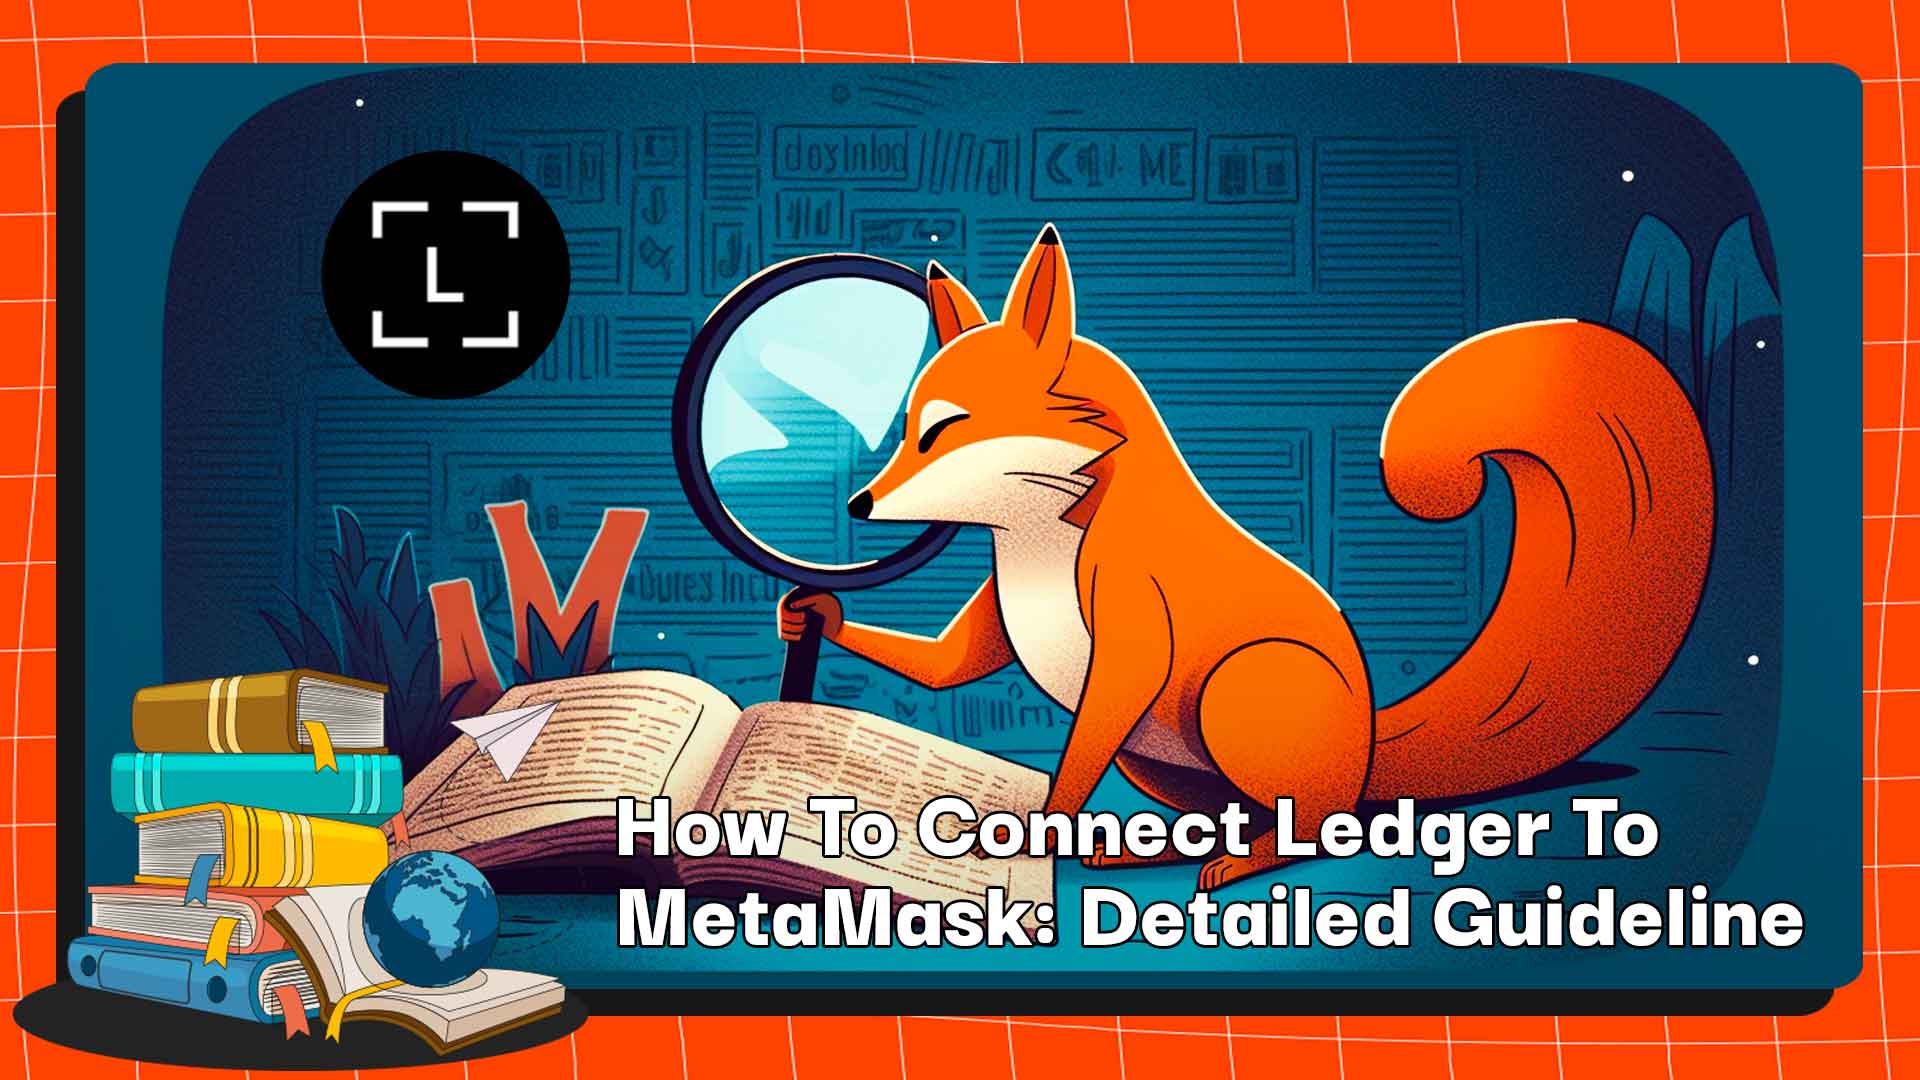 How To Connect Ledger To MetaMask: Detailed Guideline